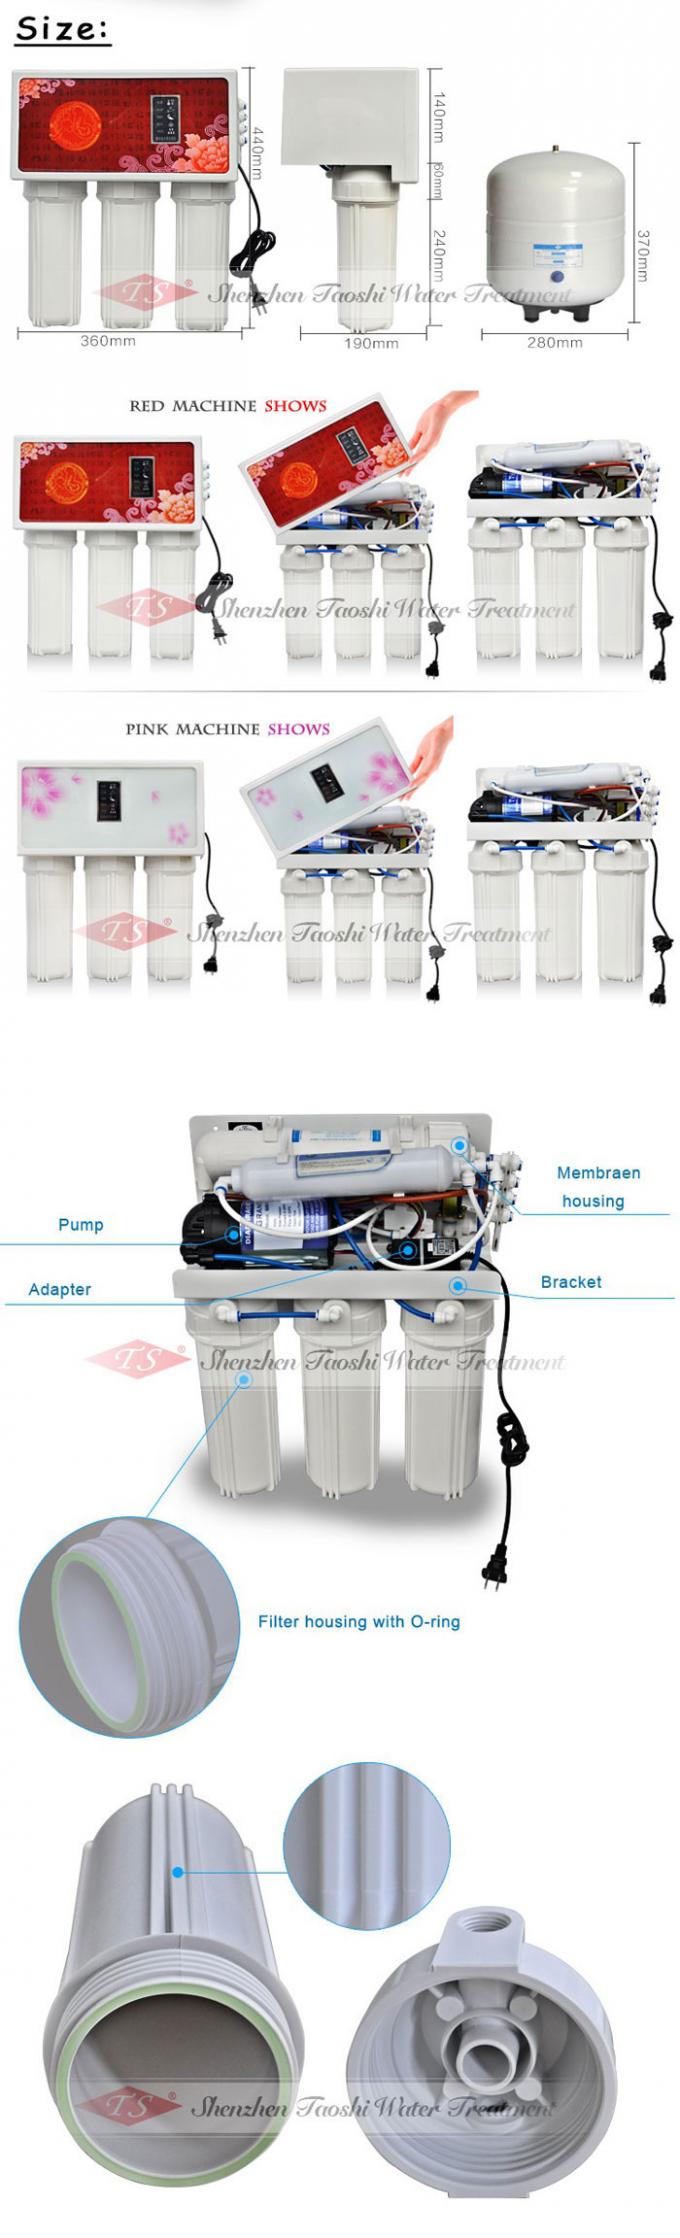 50G Light Blue Reverse Osmosis Water Filtration System With Big Dust Cover